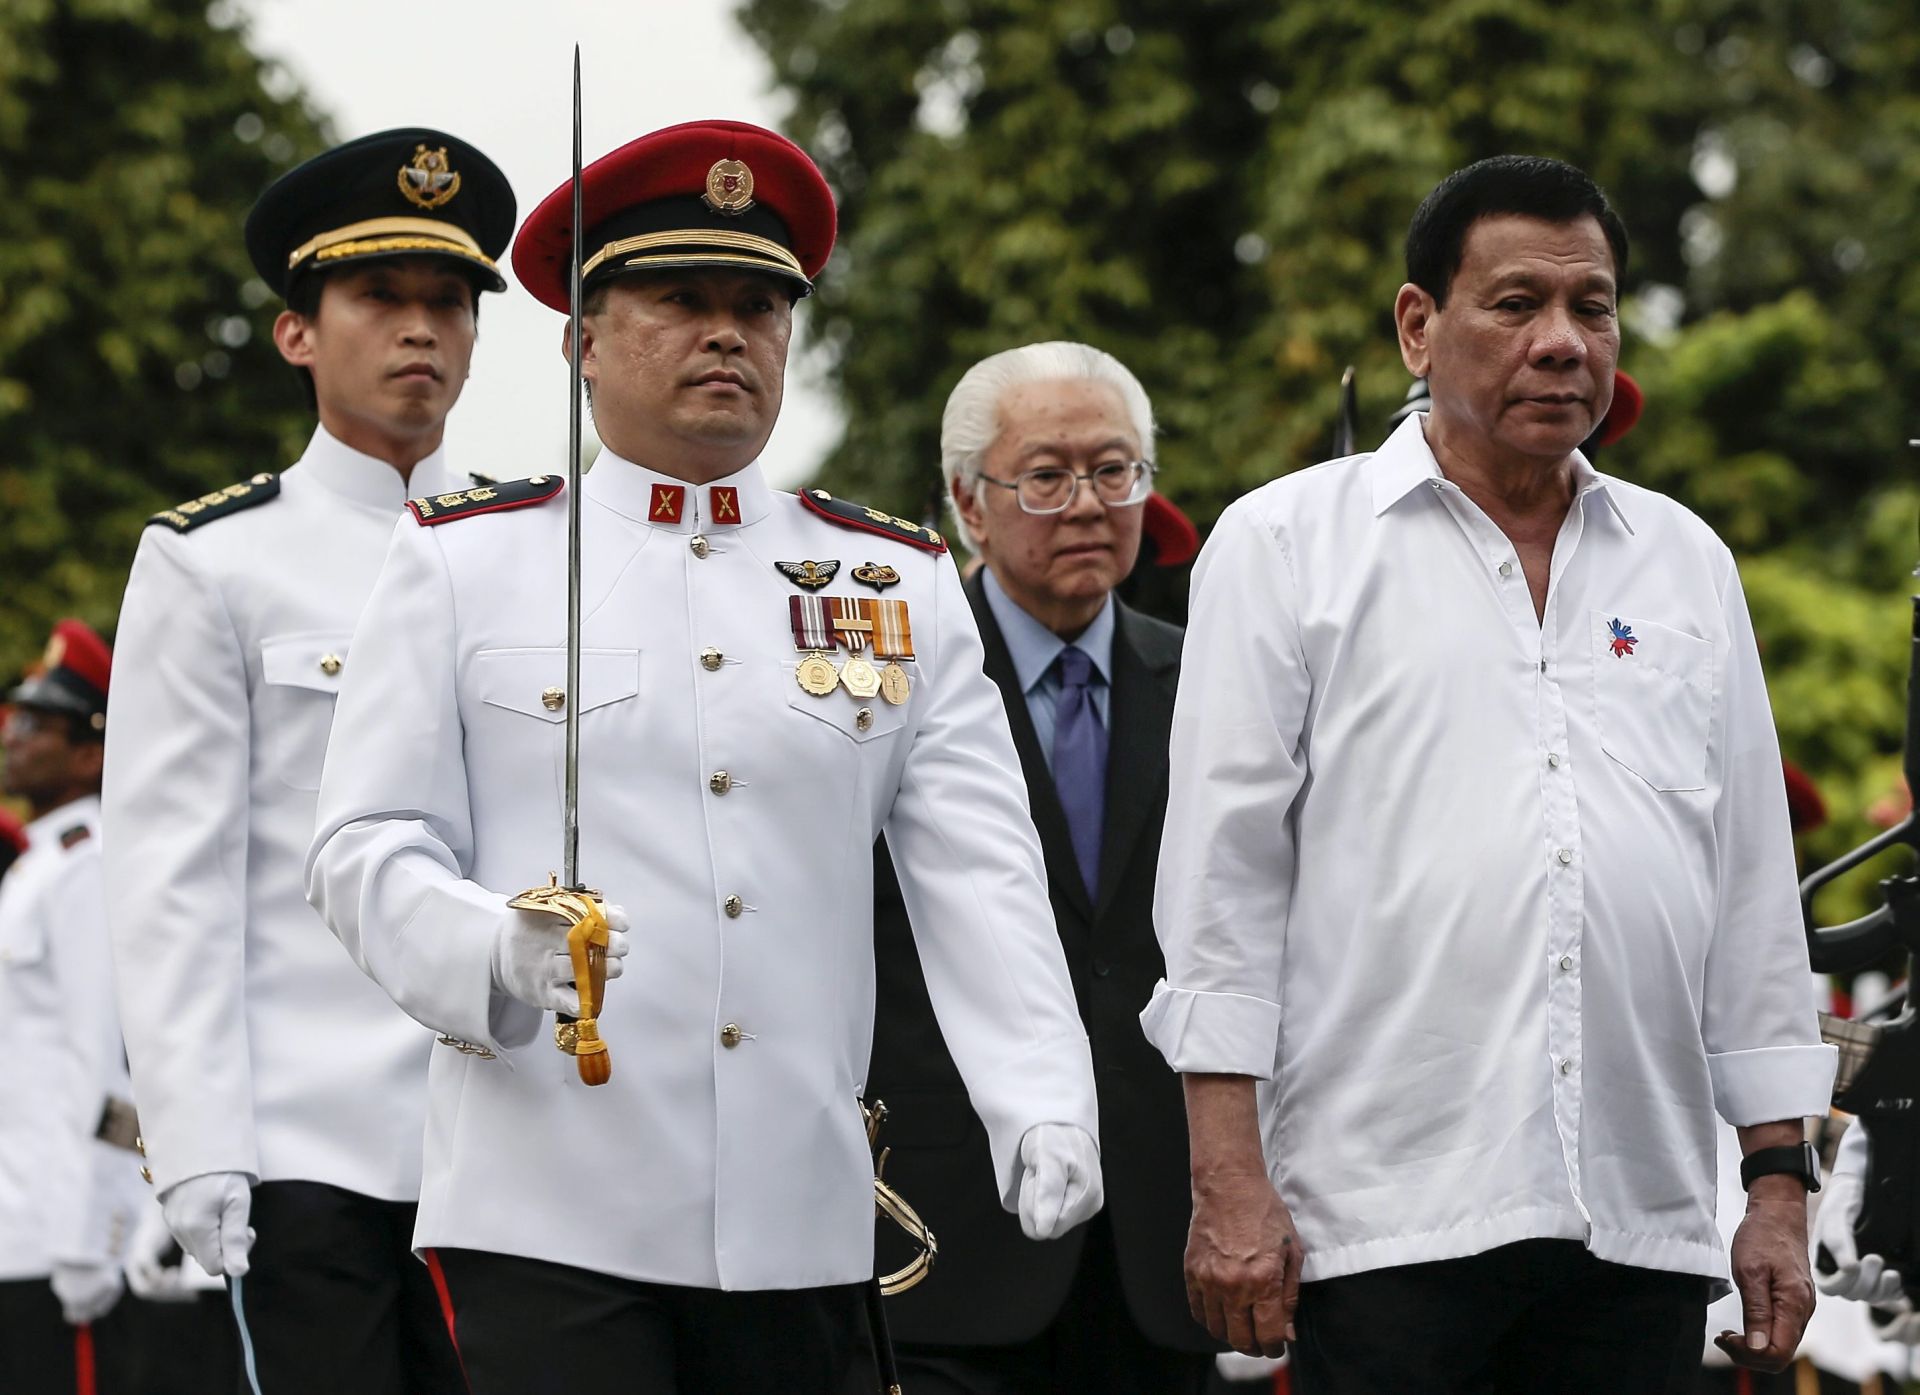 epa05676308 Filipino President Rodrigo Duterte (R) and Singapore President Tony Tan Keng Yam (C-R) inspect the honor guard during a welcome ceremony at the Istana Presidential Palace in Singapore, 15 December 2016. Duterte is on his first state visit to Singapore and will meet with members of the Filipino community.  EPA/WALLACE WOON